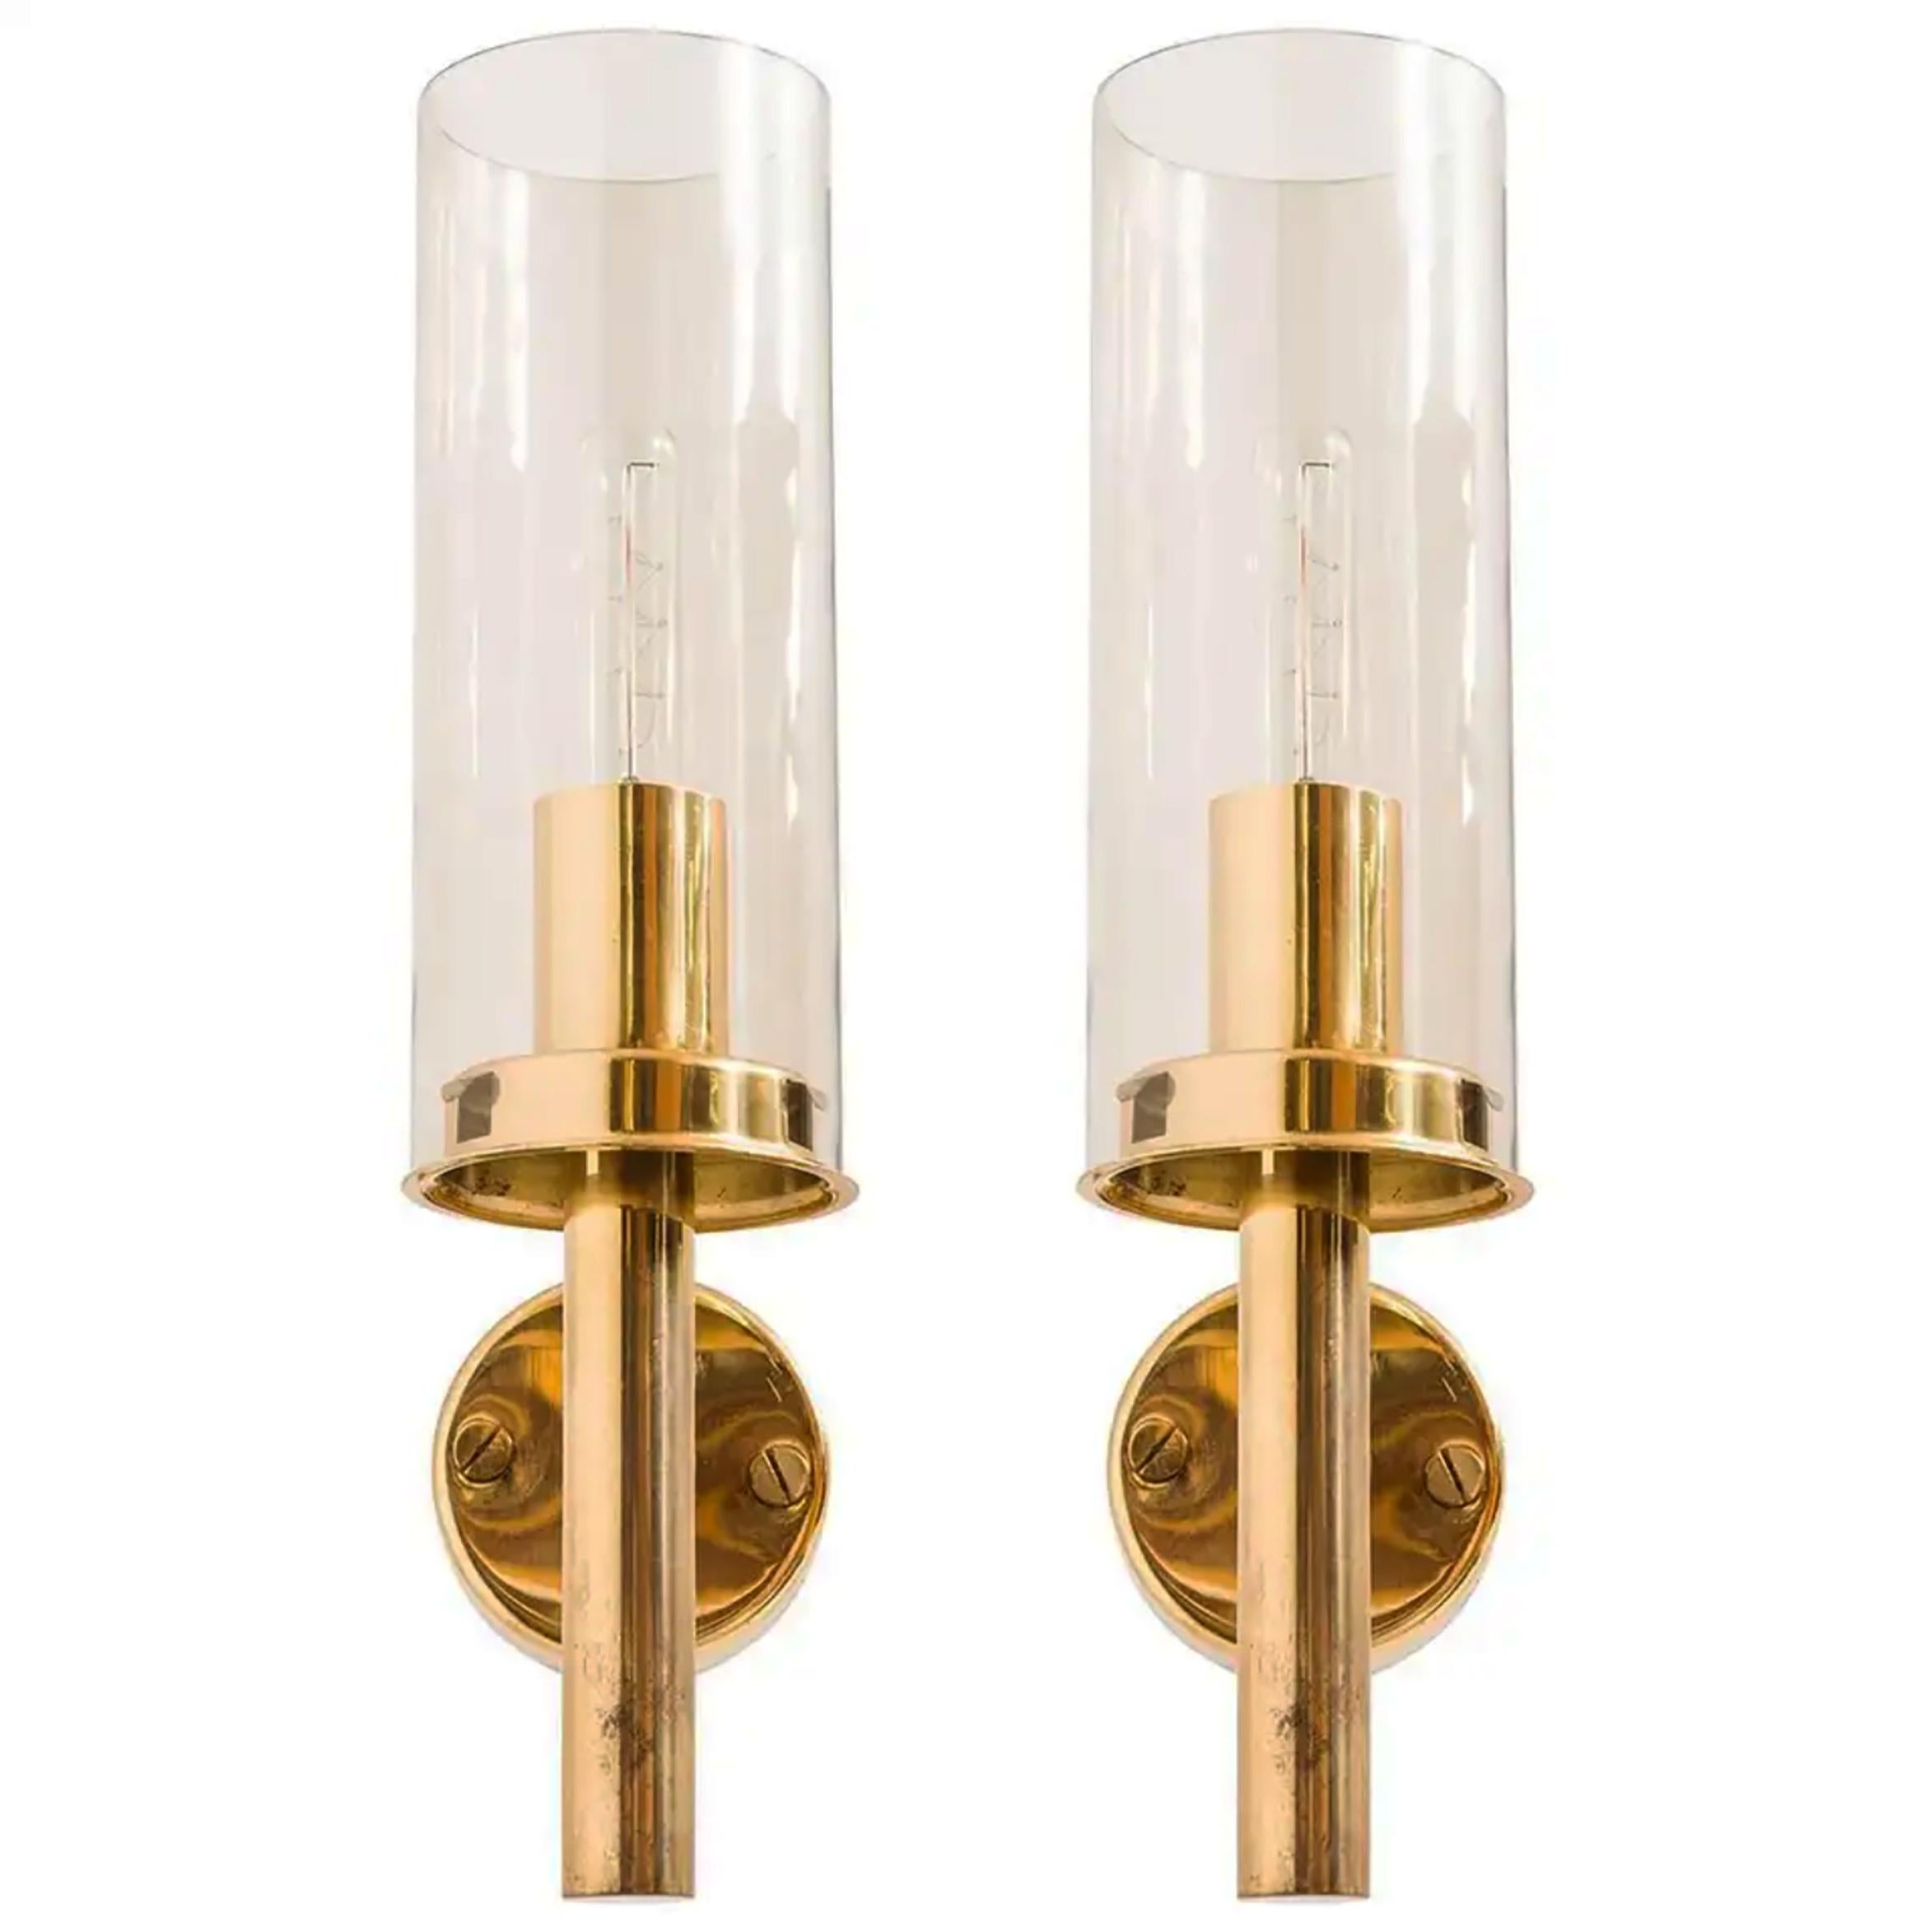 Modernist wall lamps in brass and smoke-colored glass.
Model V 169/14. Designed and made in Sweden by Hans-Agne Jakobsson from circa 1960 second half.
Fully working and in very good vintage condition.
 